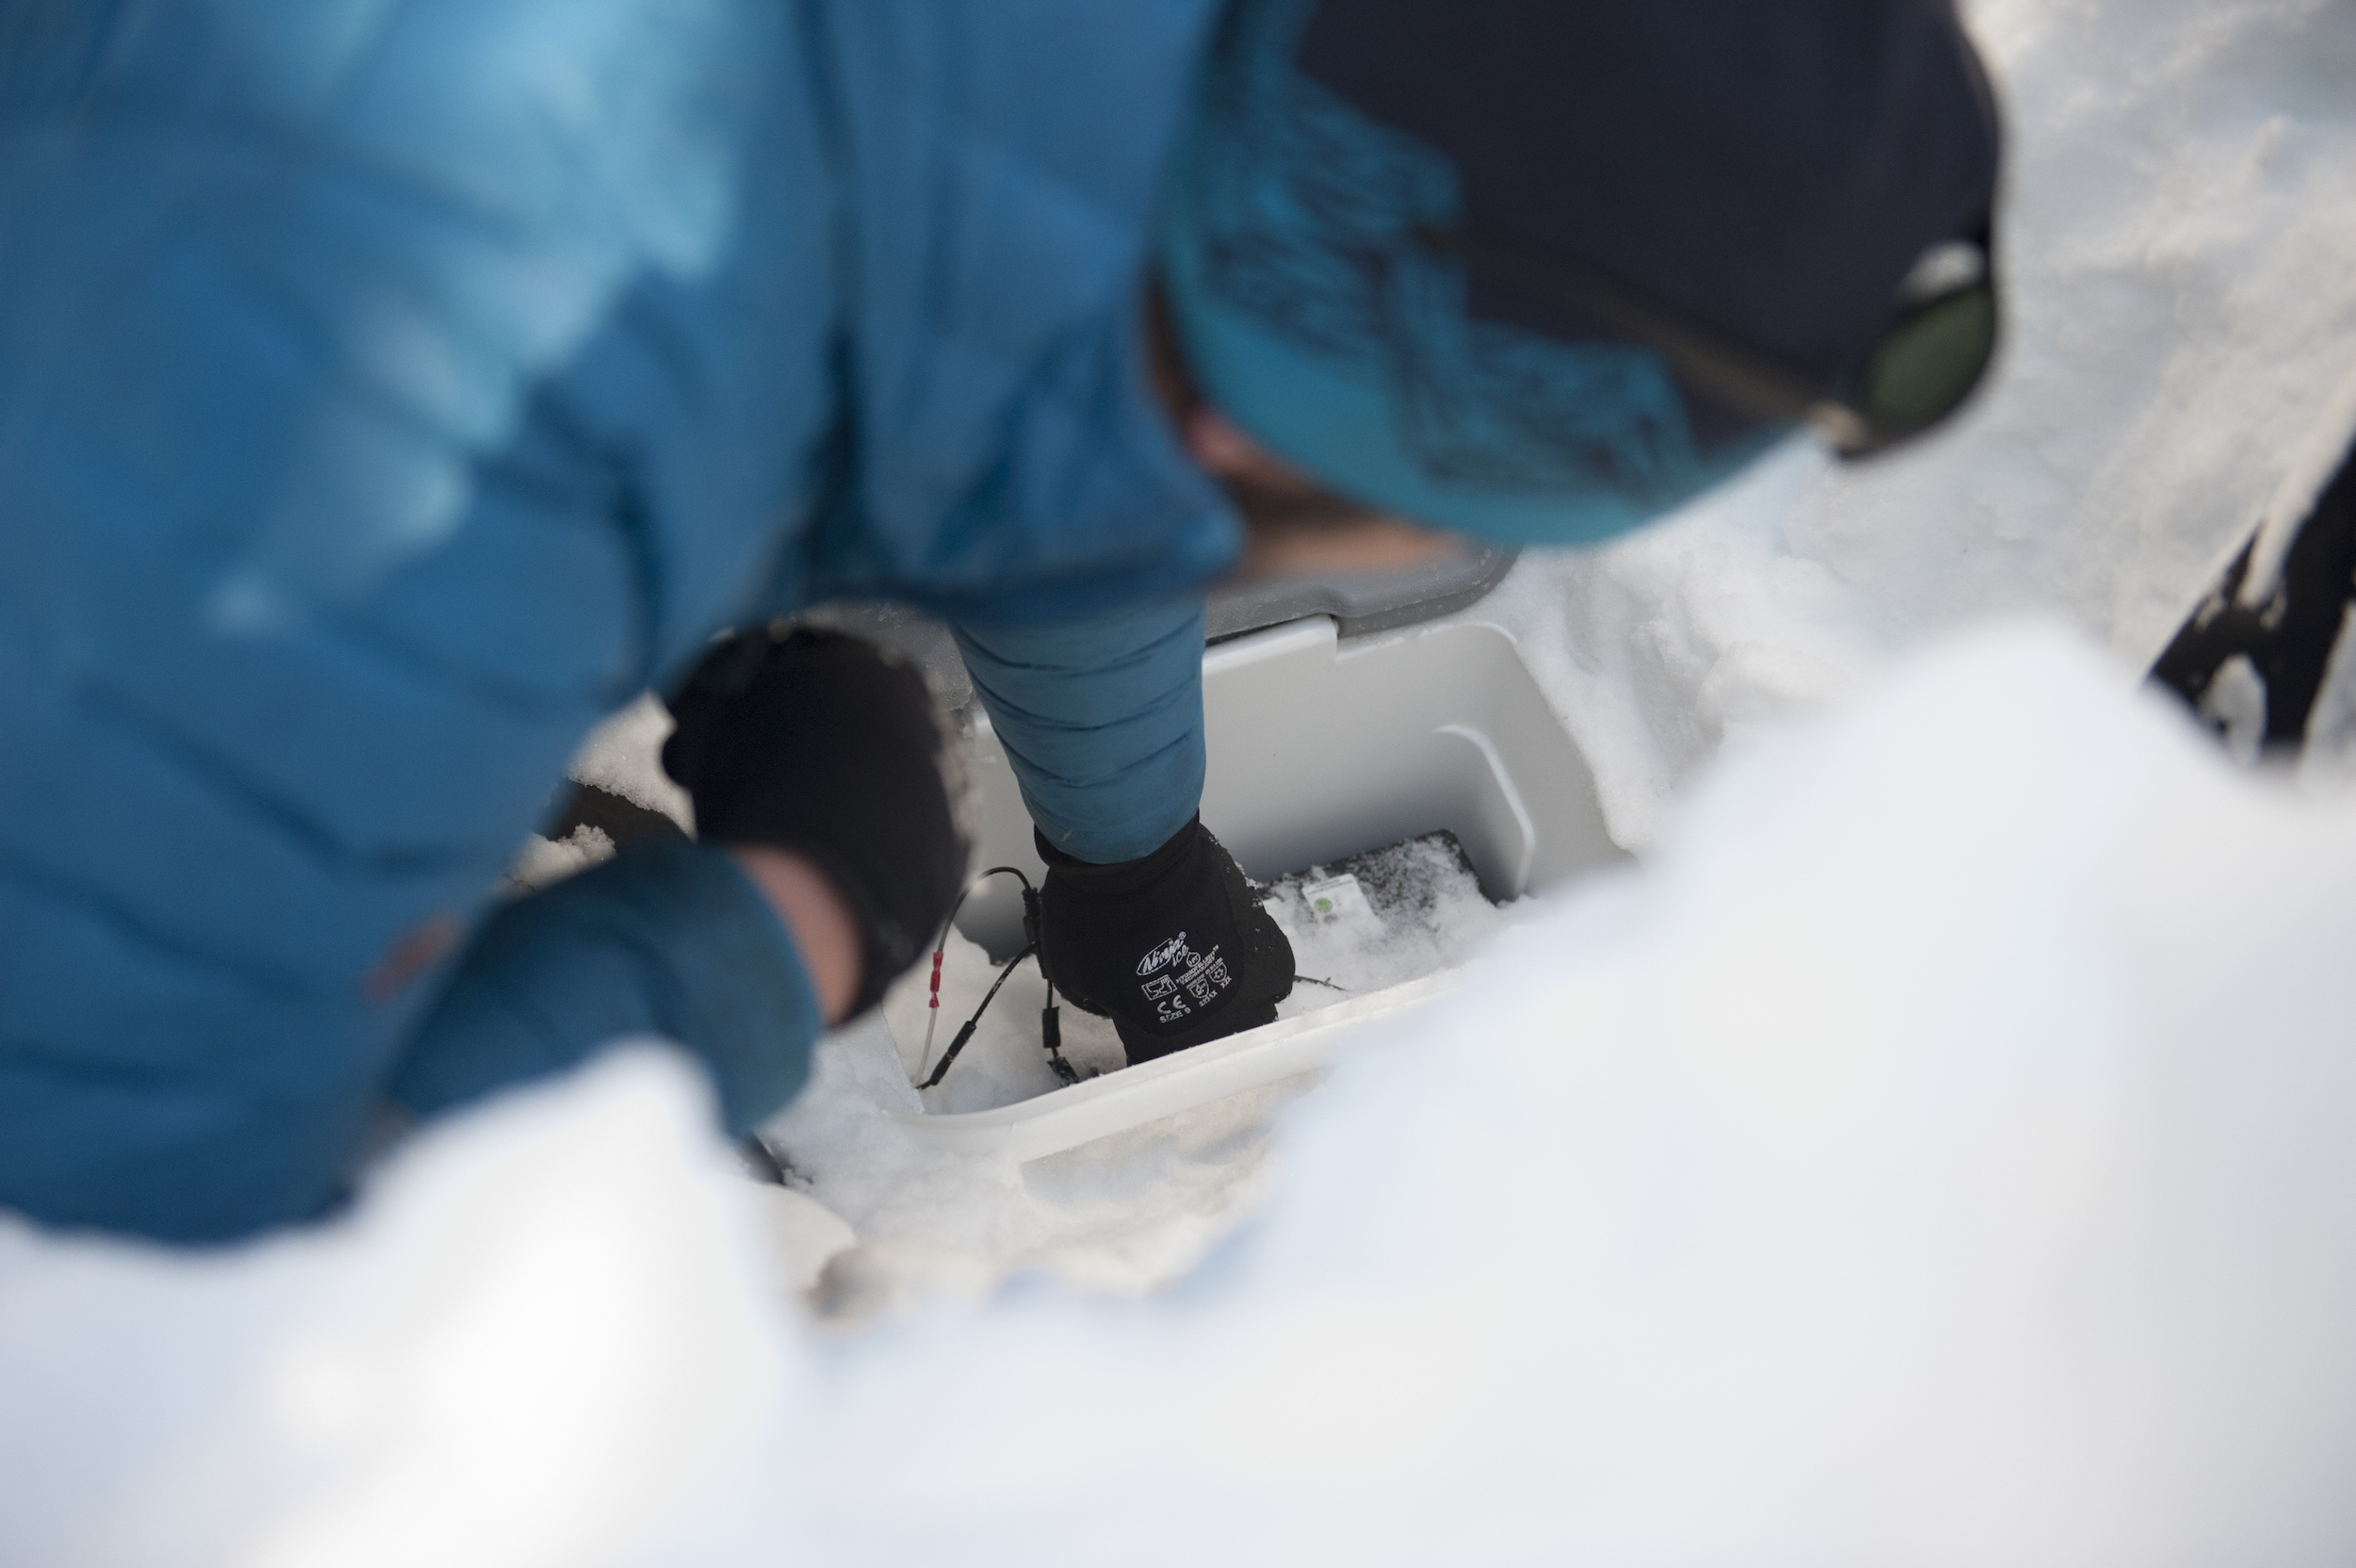 A biologist checks equipment buried in the snow